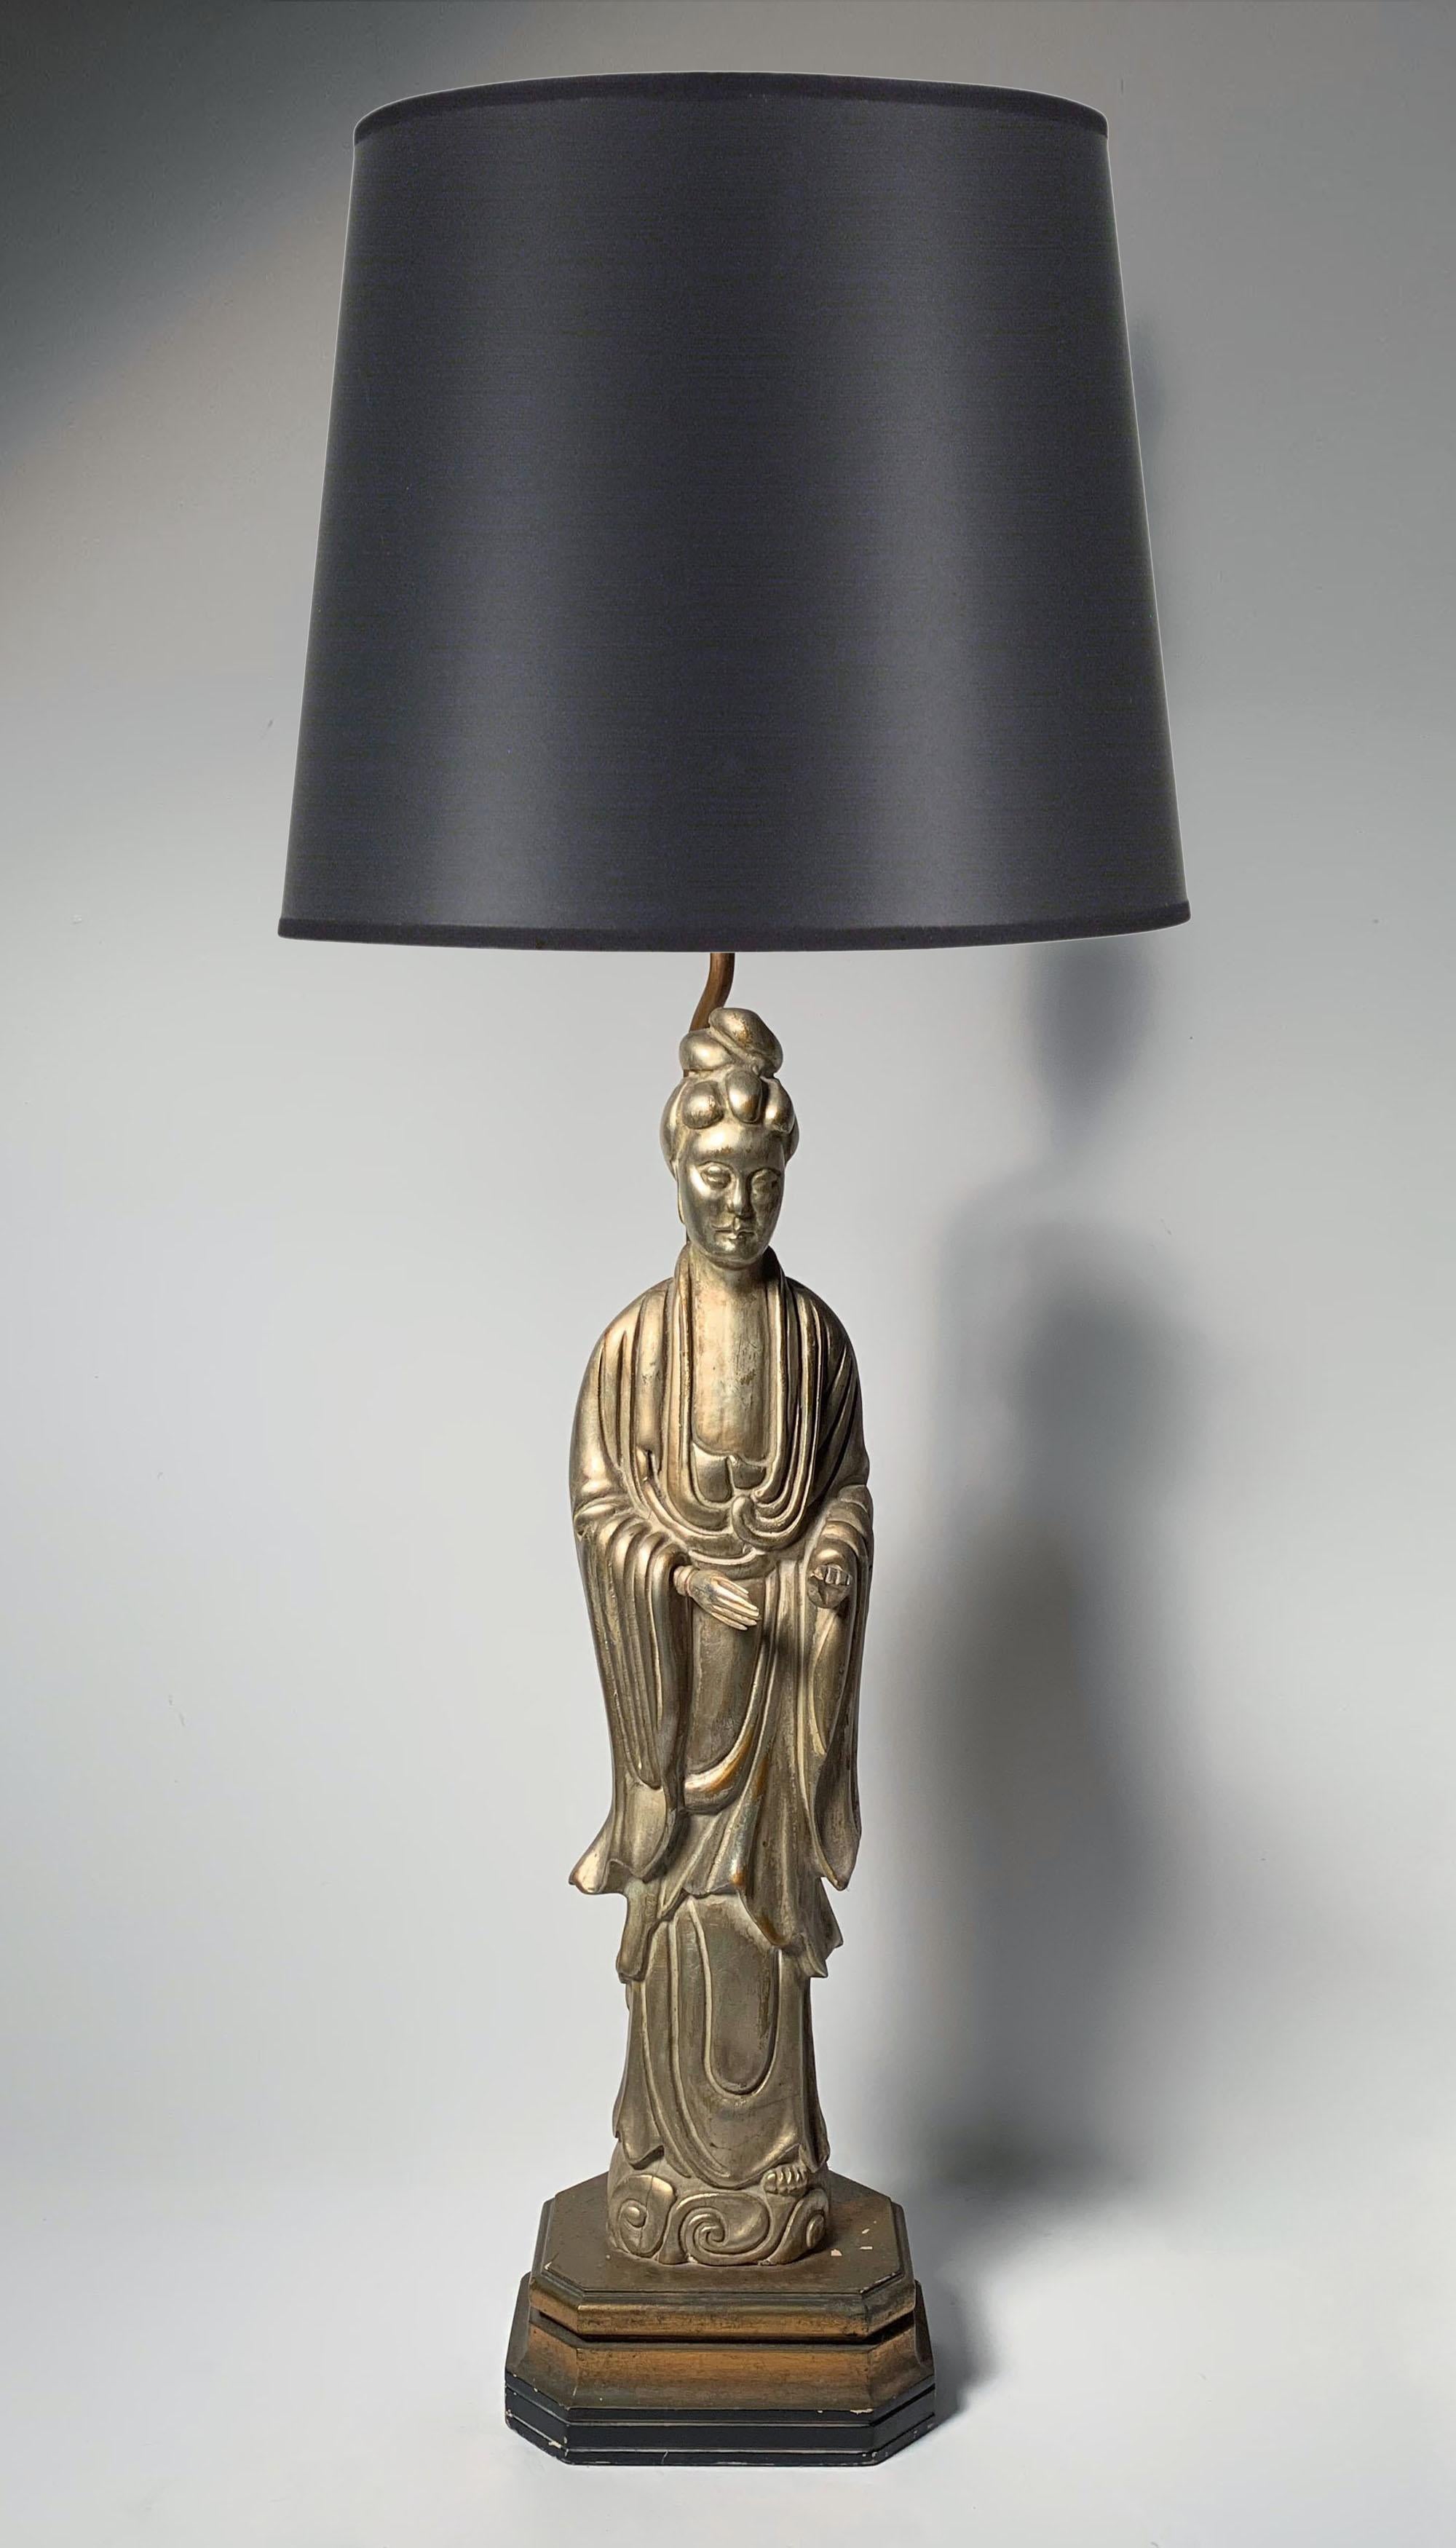 Exquisitely carved Quan Yin table lamp dating to the 1930s-1940s. Very fine in detail. Beautiful aged silver finish. Very possibly by James Mont. Unsigned. Style of Asian, chinoiserie.

Height is to top of finial.

Style of James Mont

Shade not